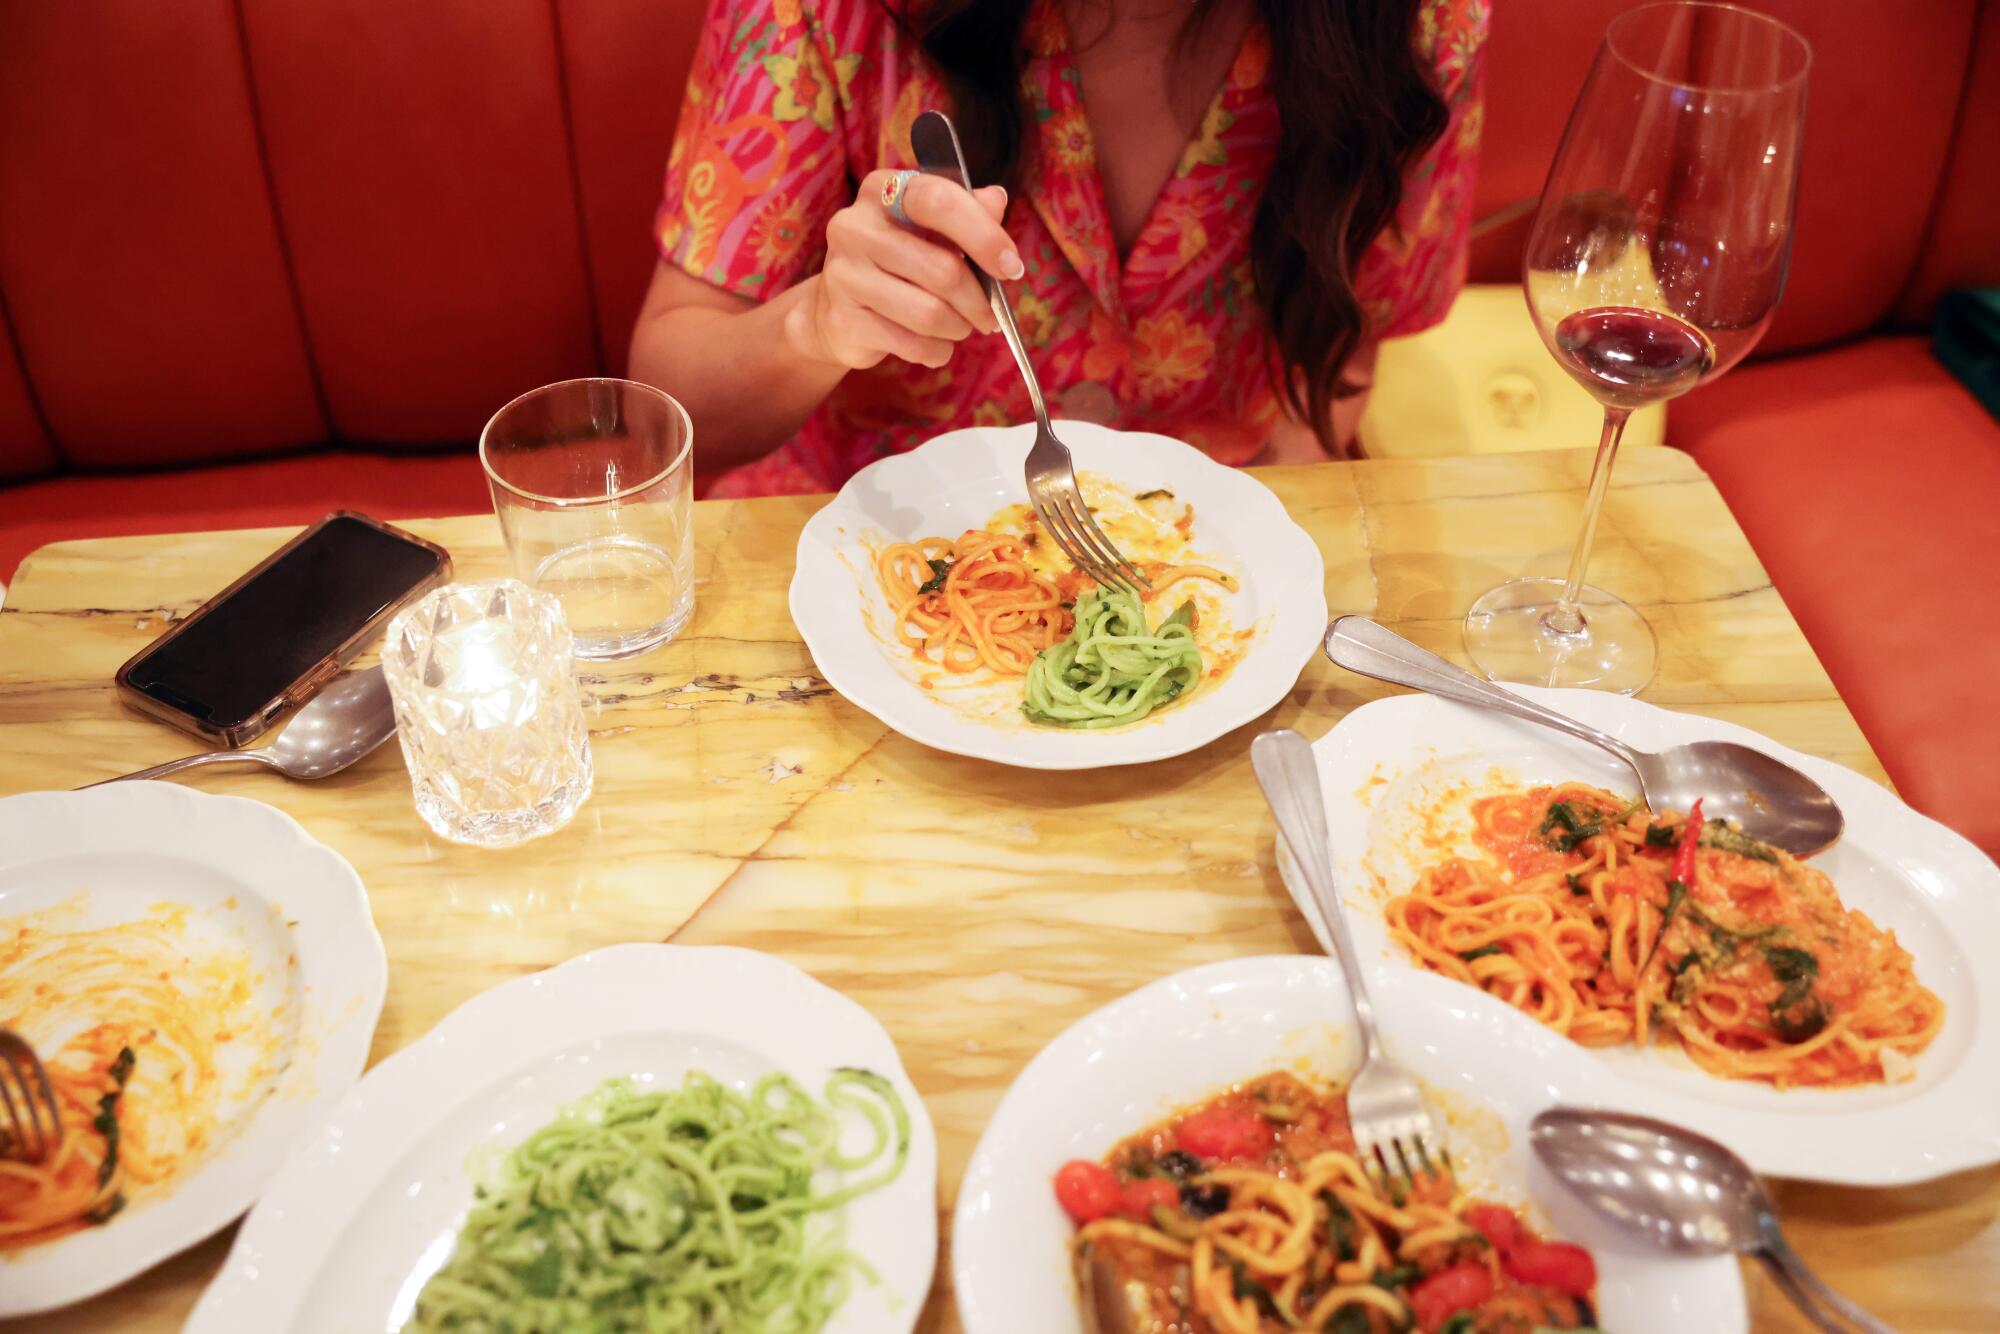 A woman sticks a fork into one of several plates of different kinds of pasta on the table in front of her.